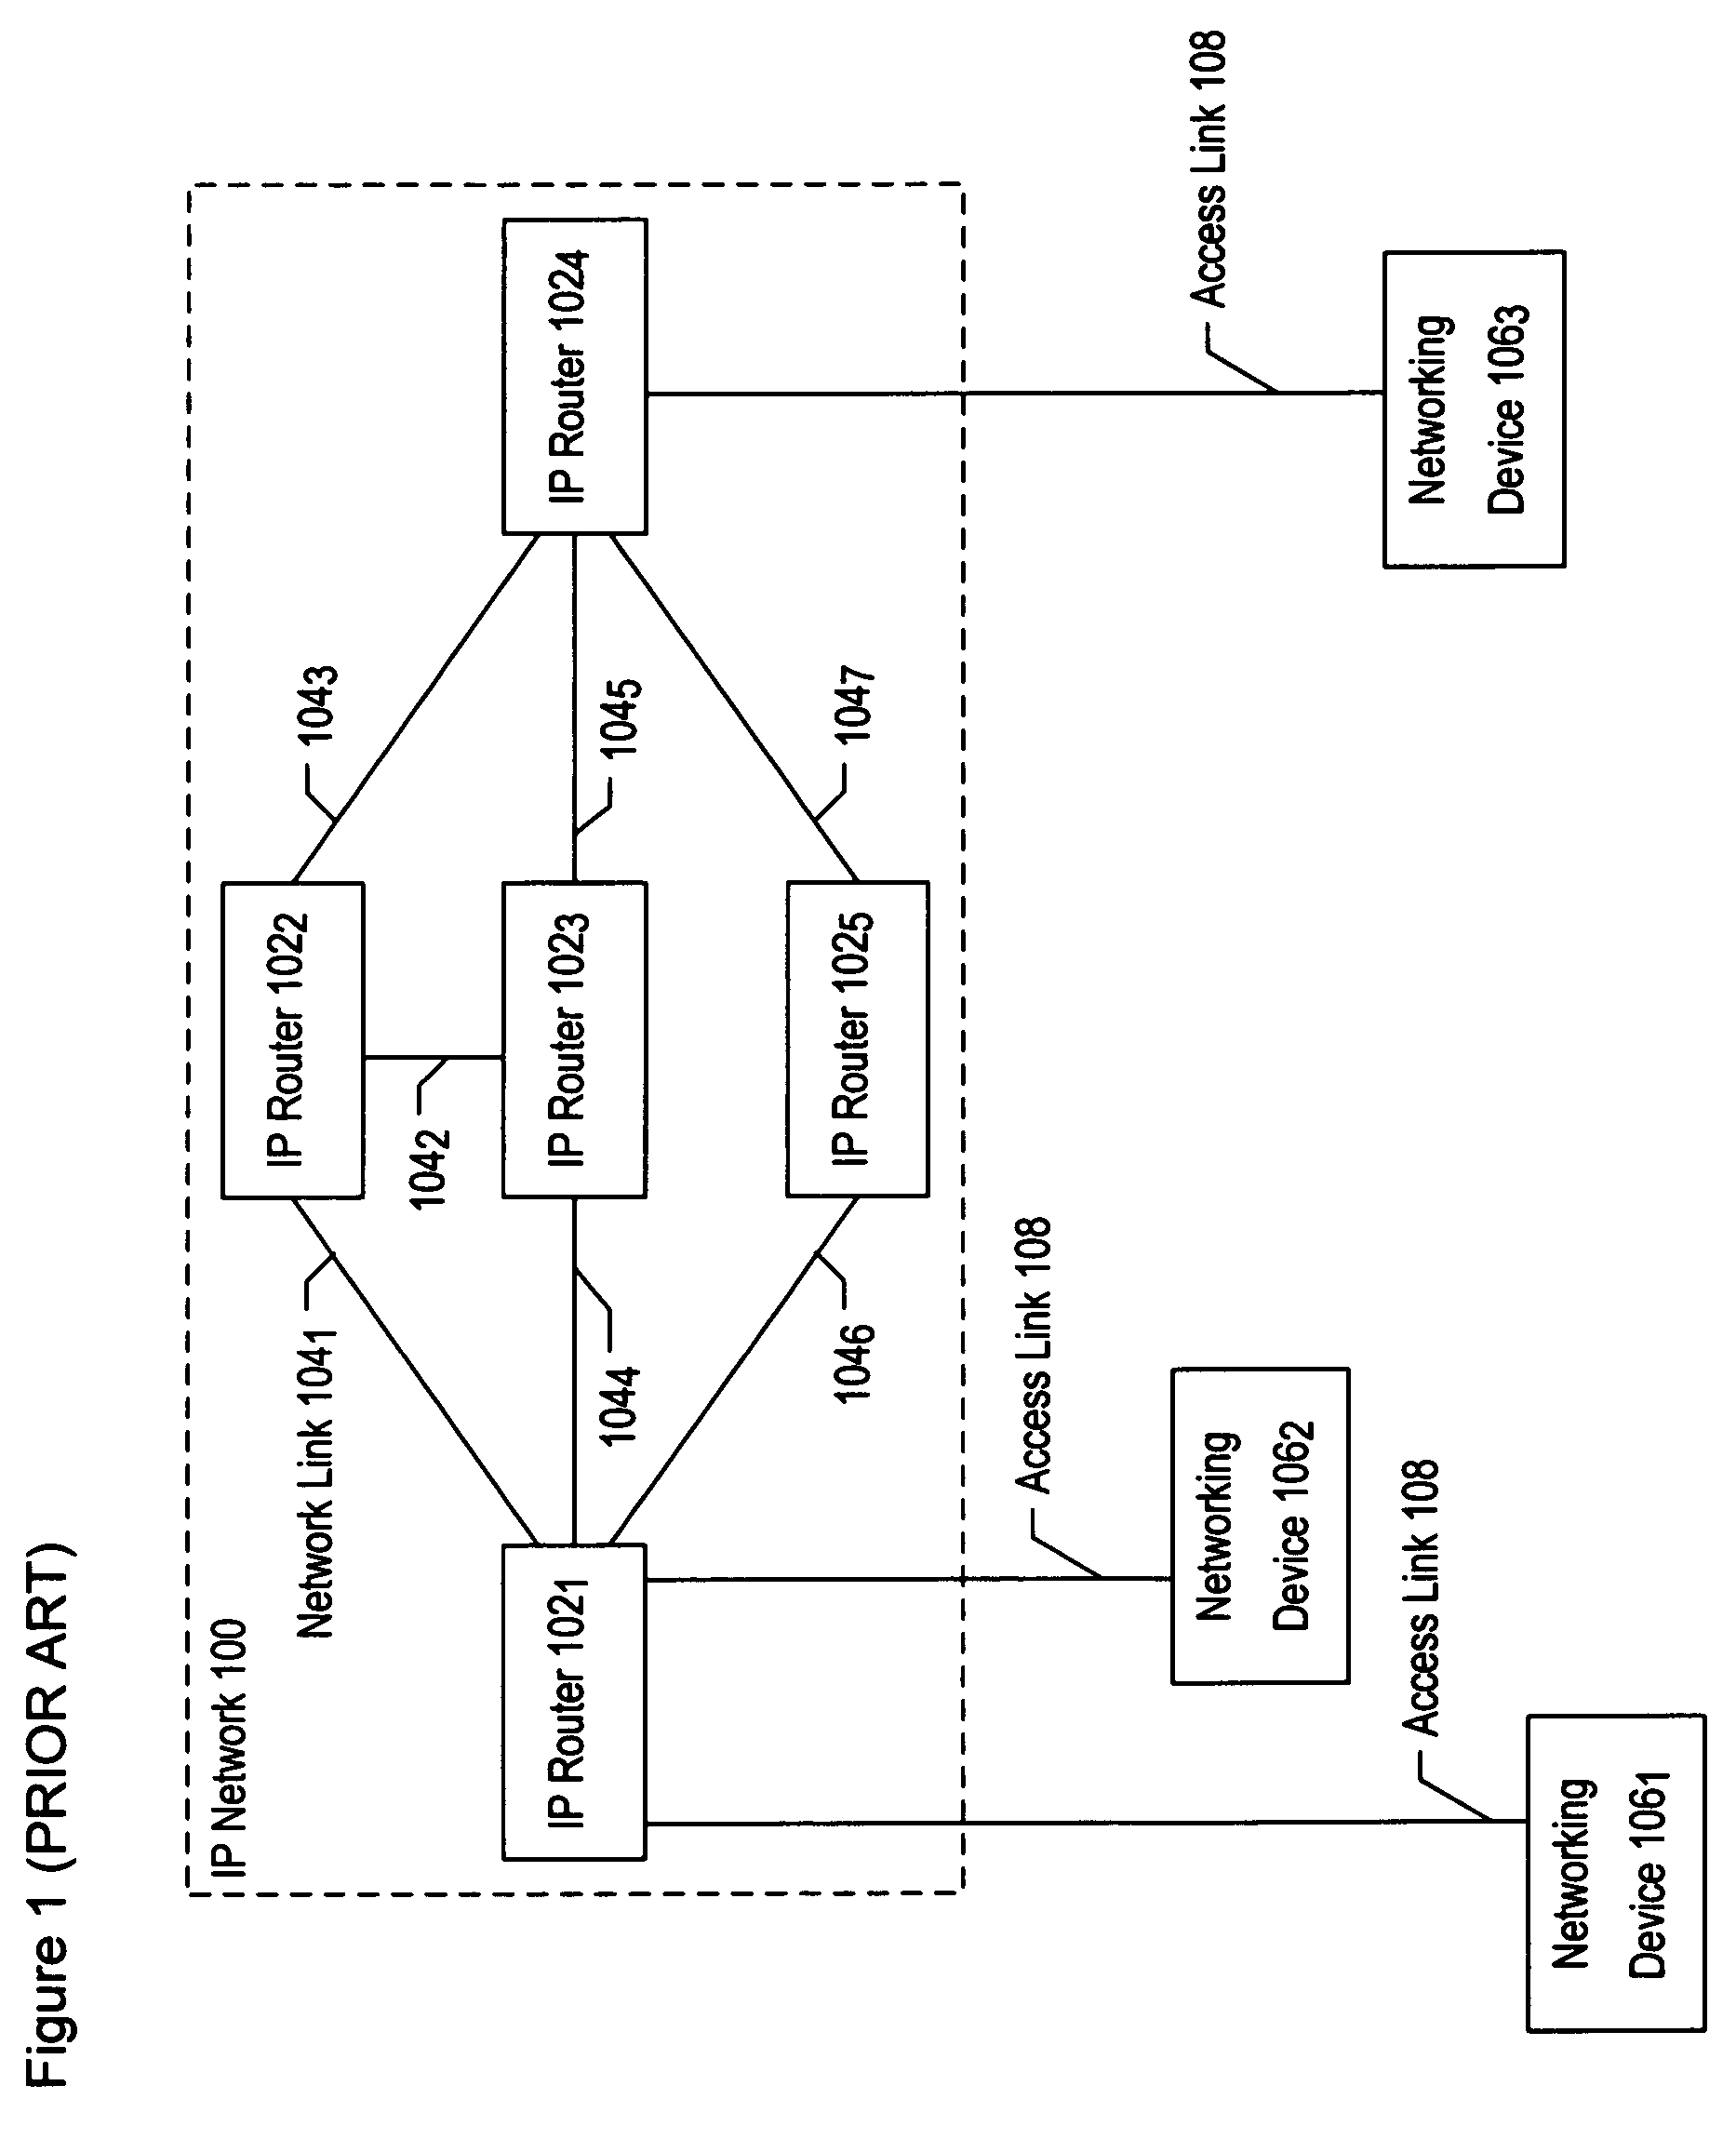 Method and apparatus for improved IP networks and high-quality services